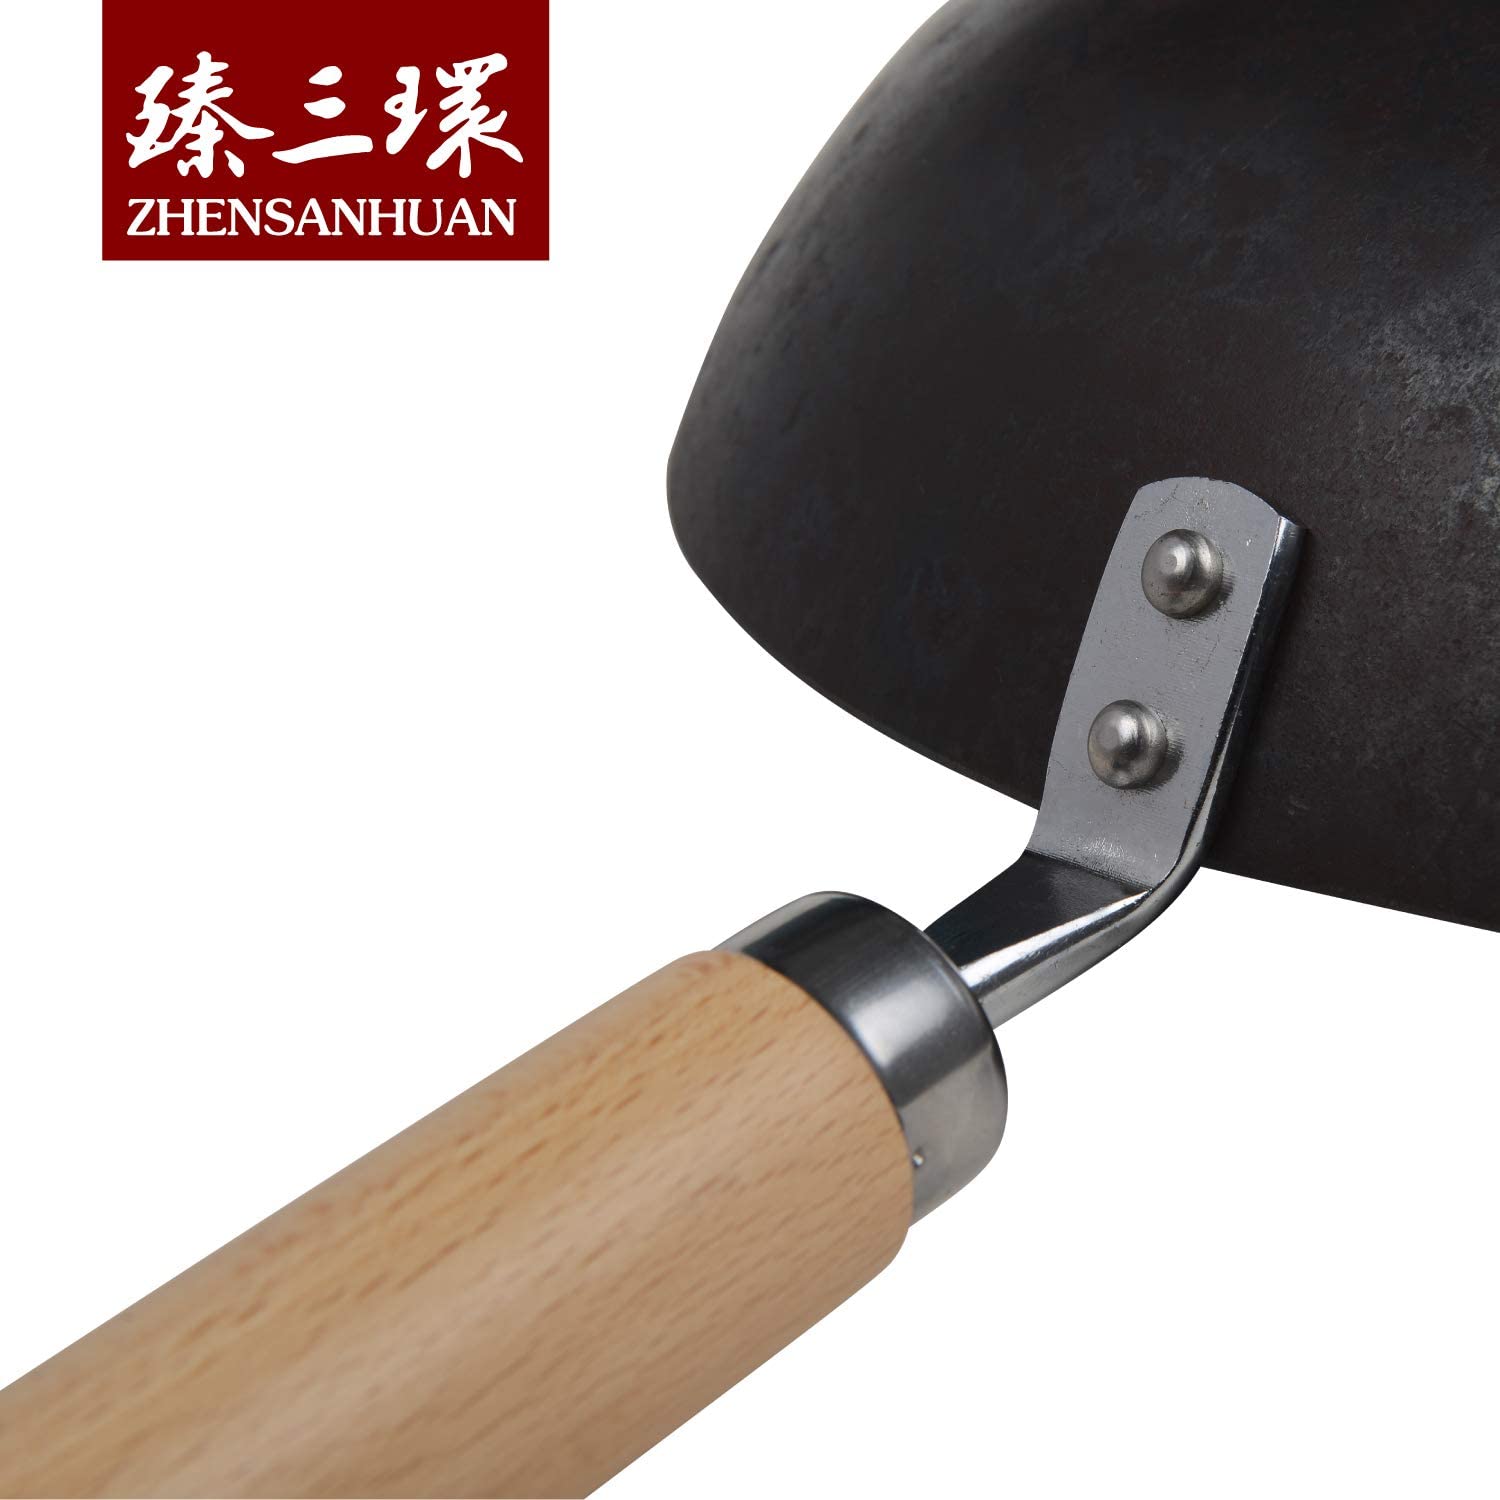 Zhensanhuan Hand Hammered Iron Wok Stir Fry Pans, Nonstick, No Coating,  Flat Bottom, Induction Suitable, 章丘铁锅for Small Family 